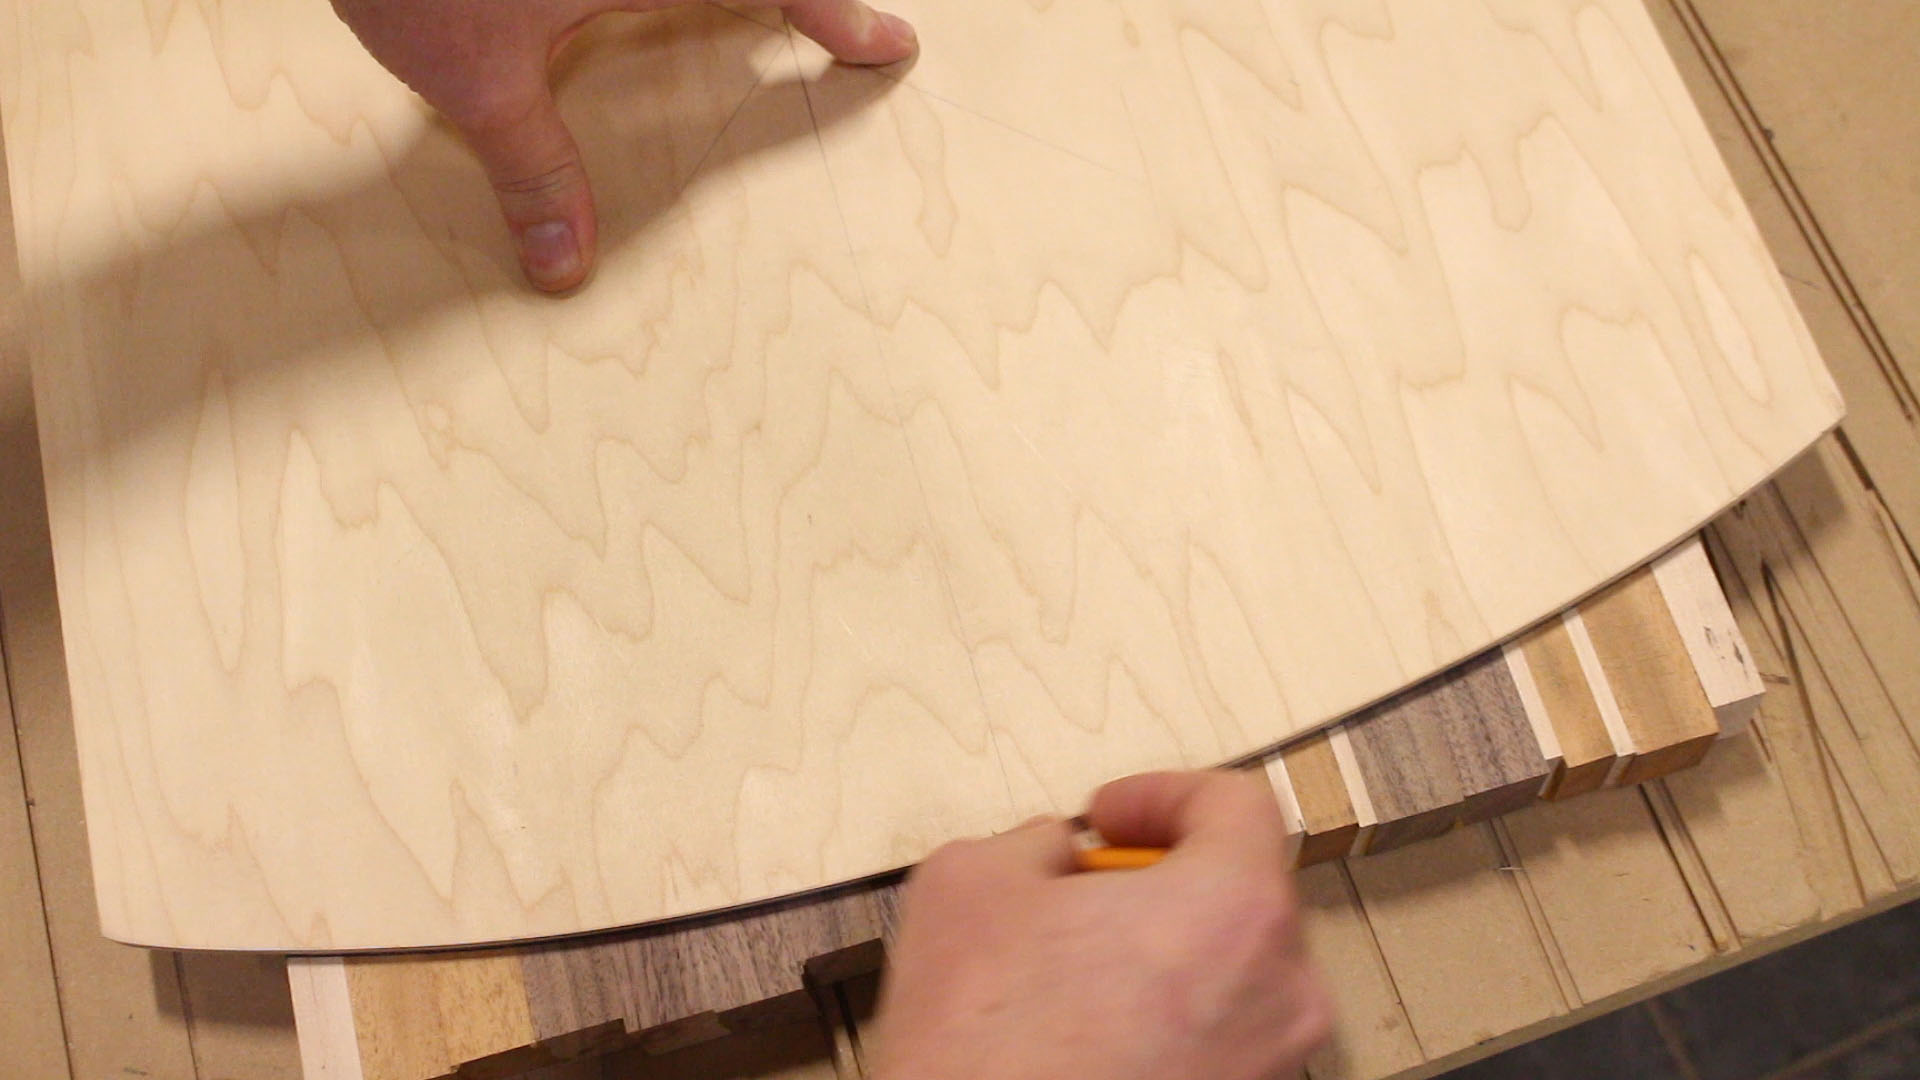 Bocote Thin Cutting Board Strips - Woodworkers Source